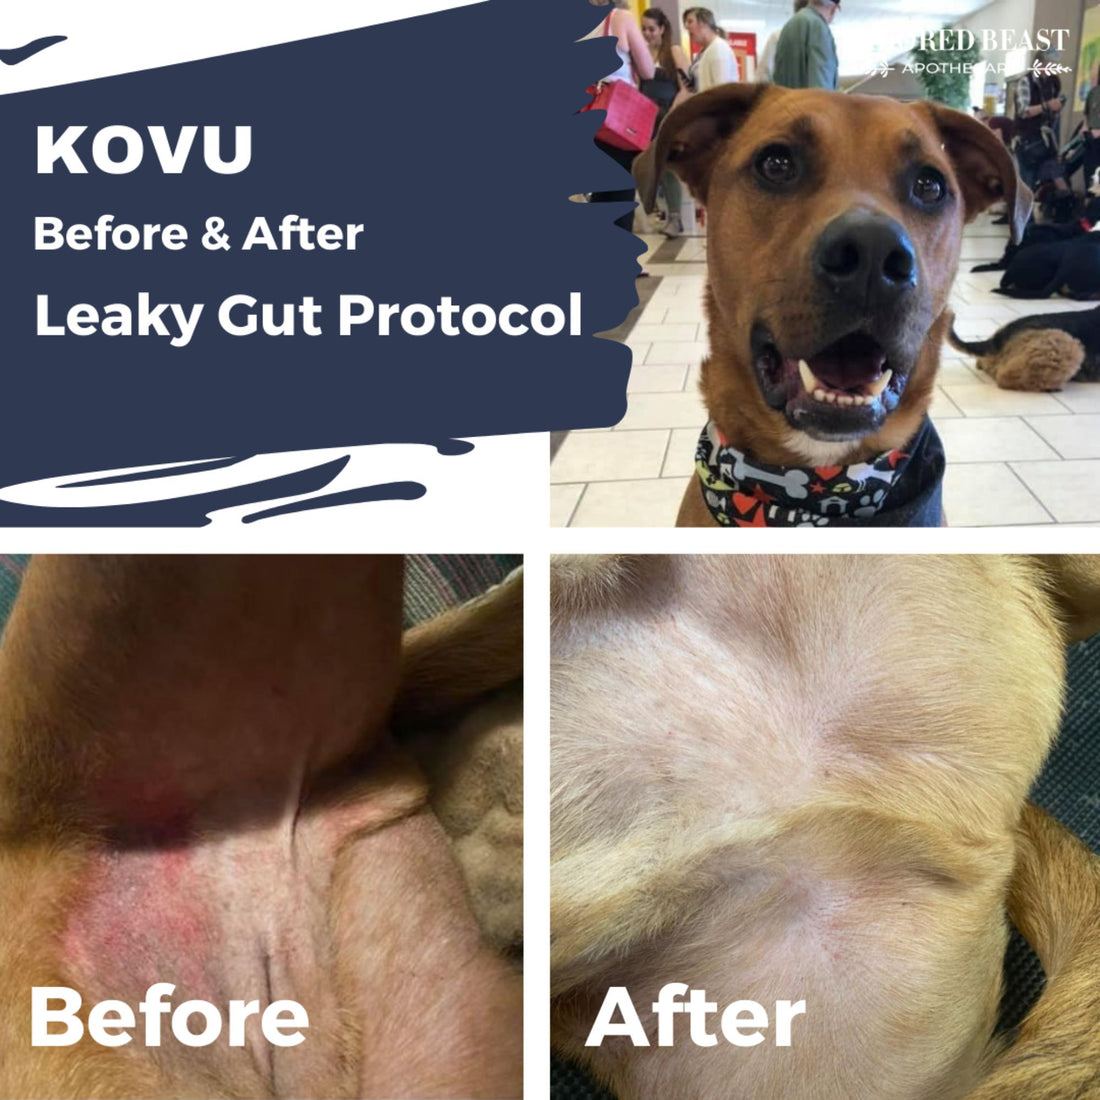 Adored Beast Leaky Gut protocol Before and after photo